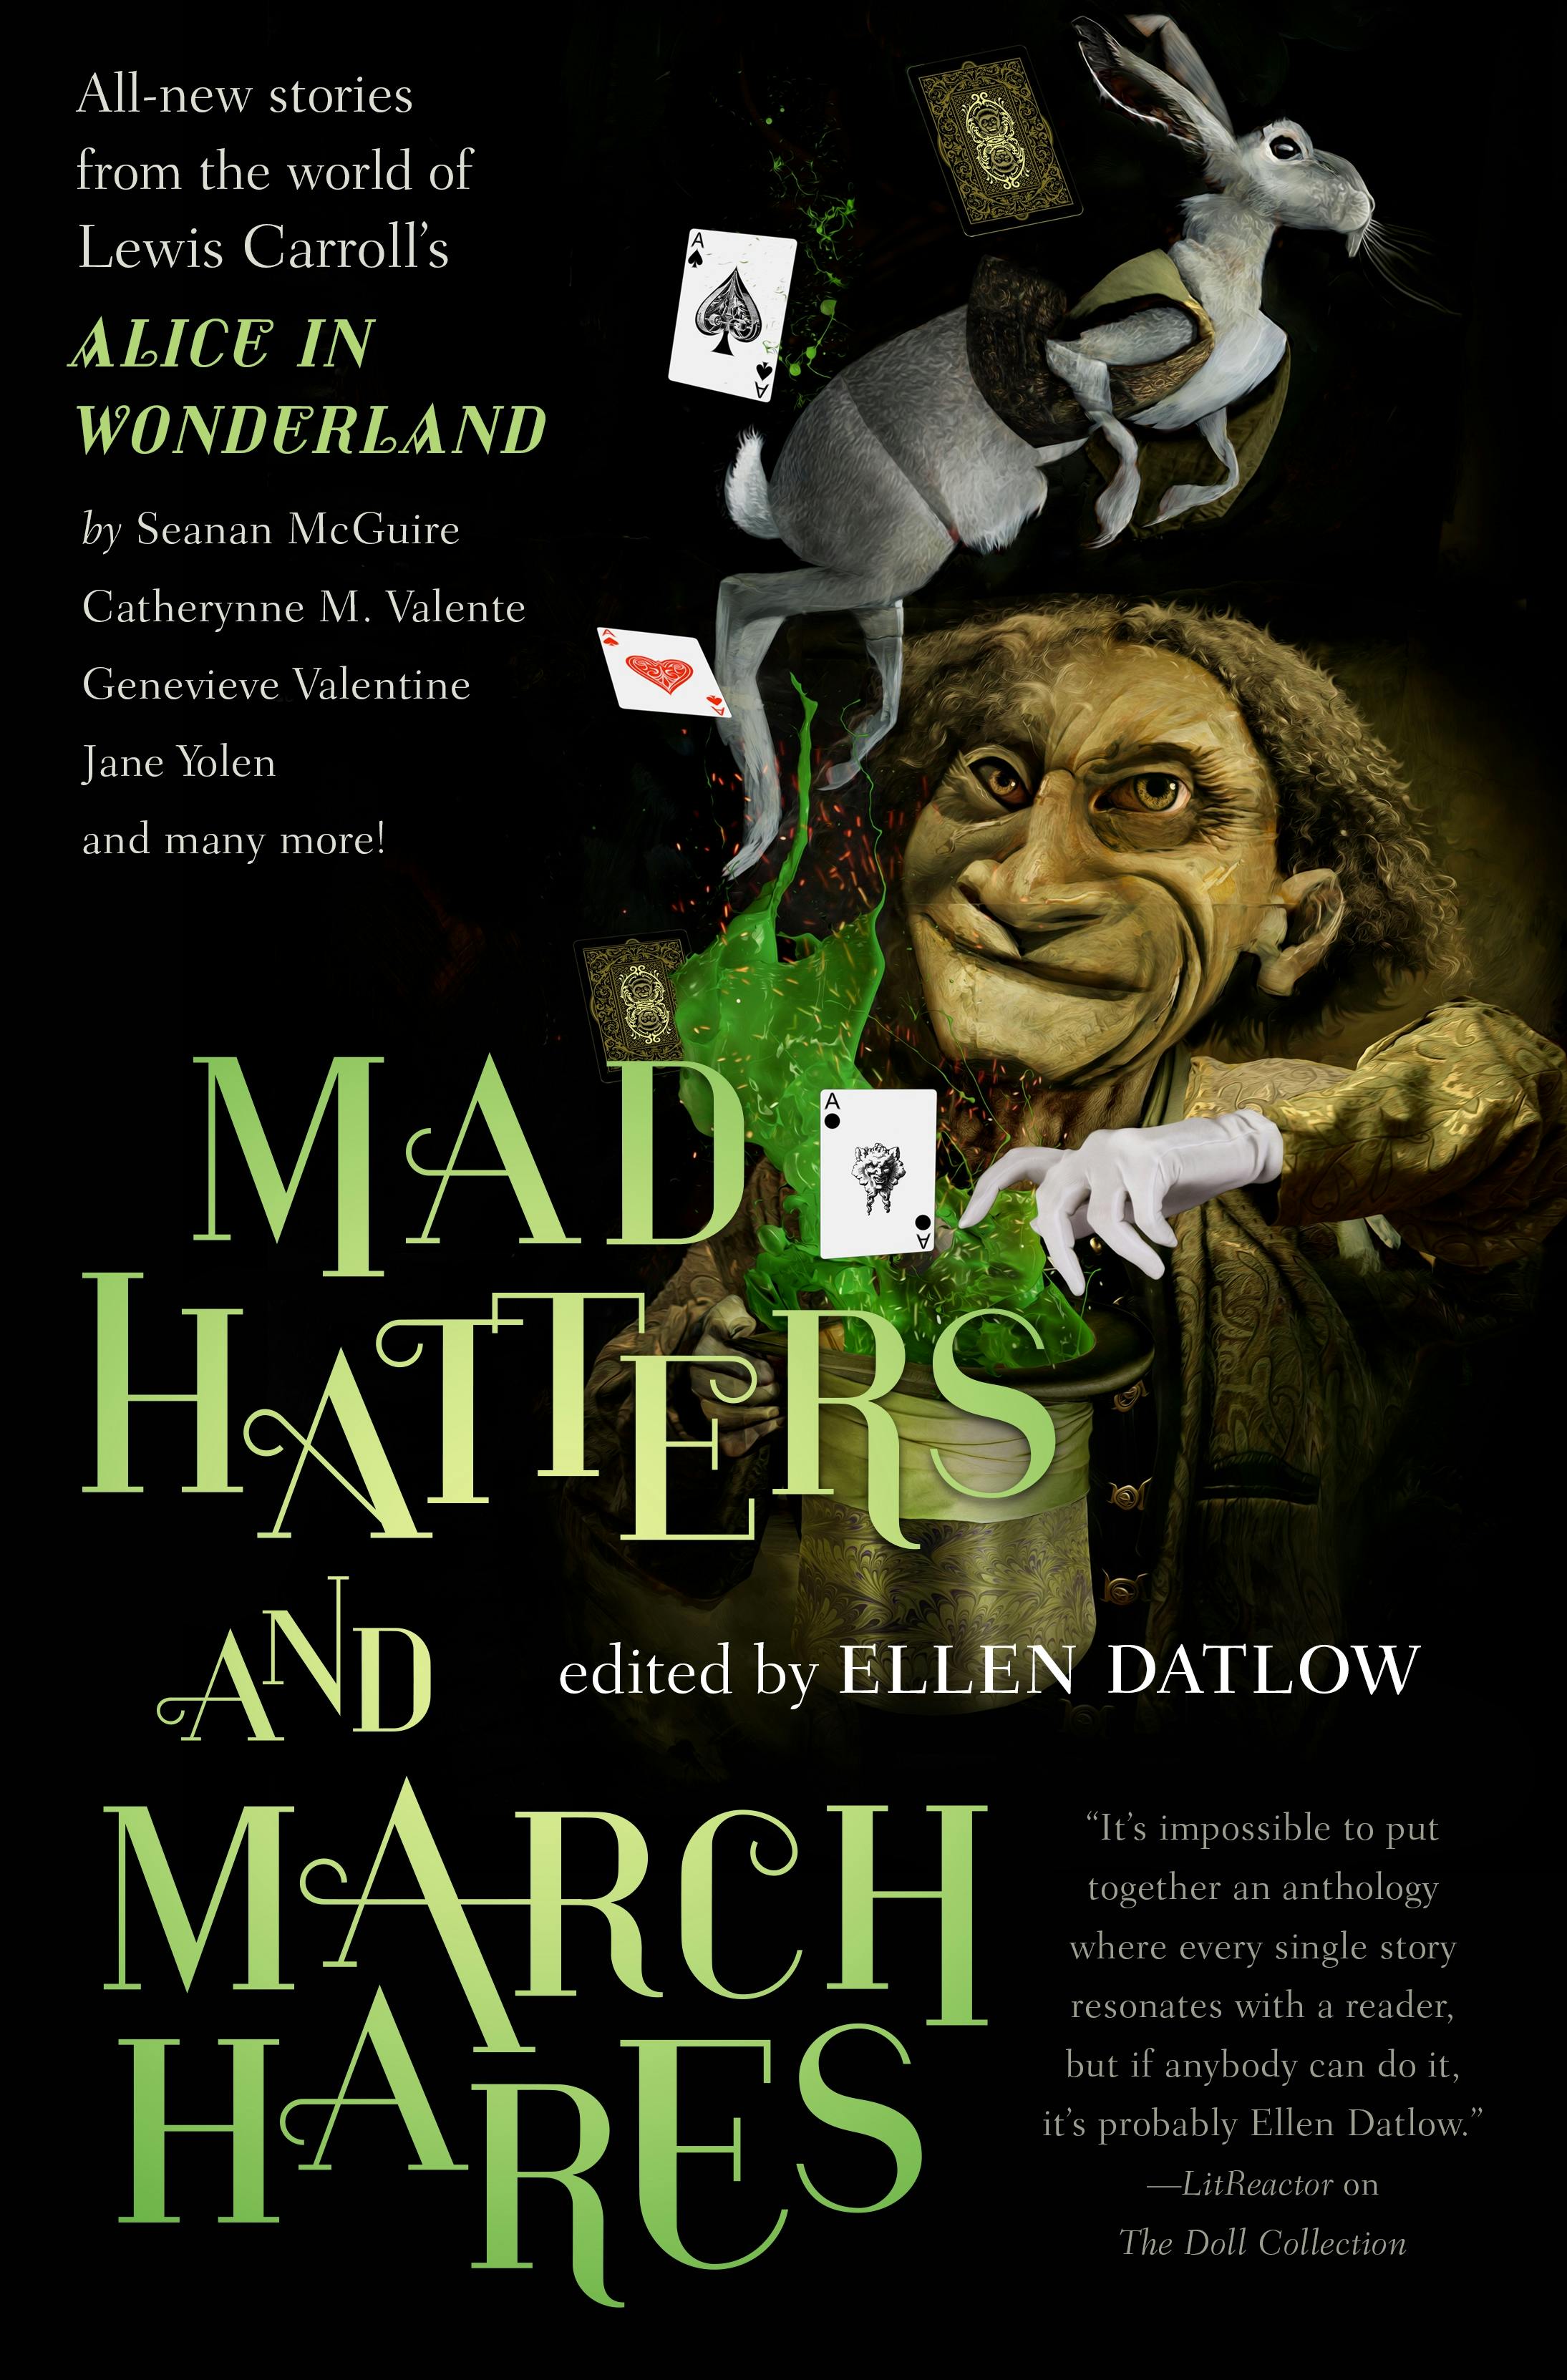 Cover for the book titled as: Mad Hatters and March Hares